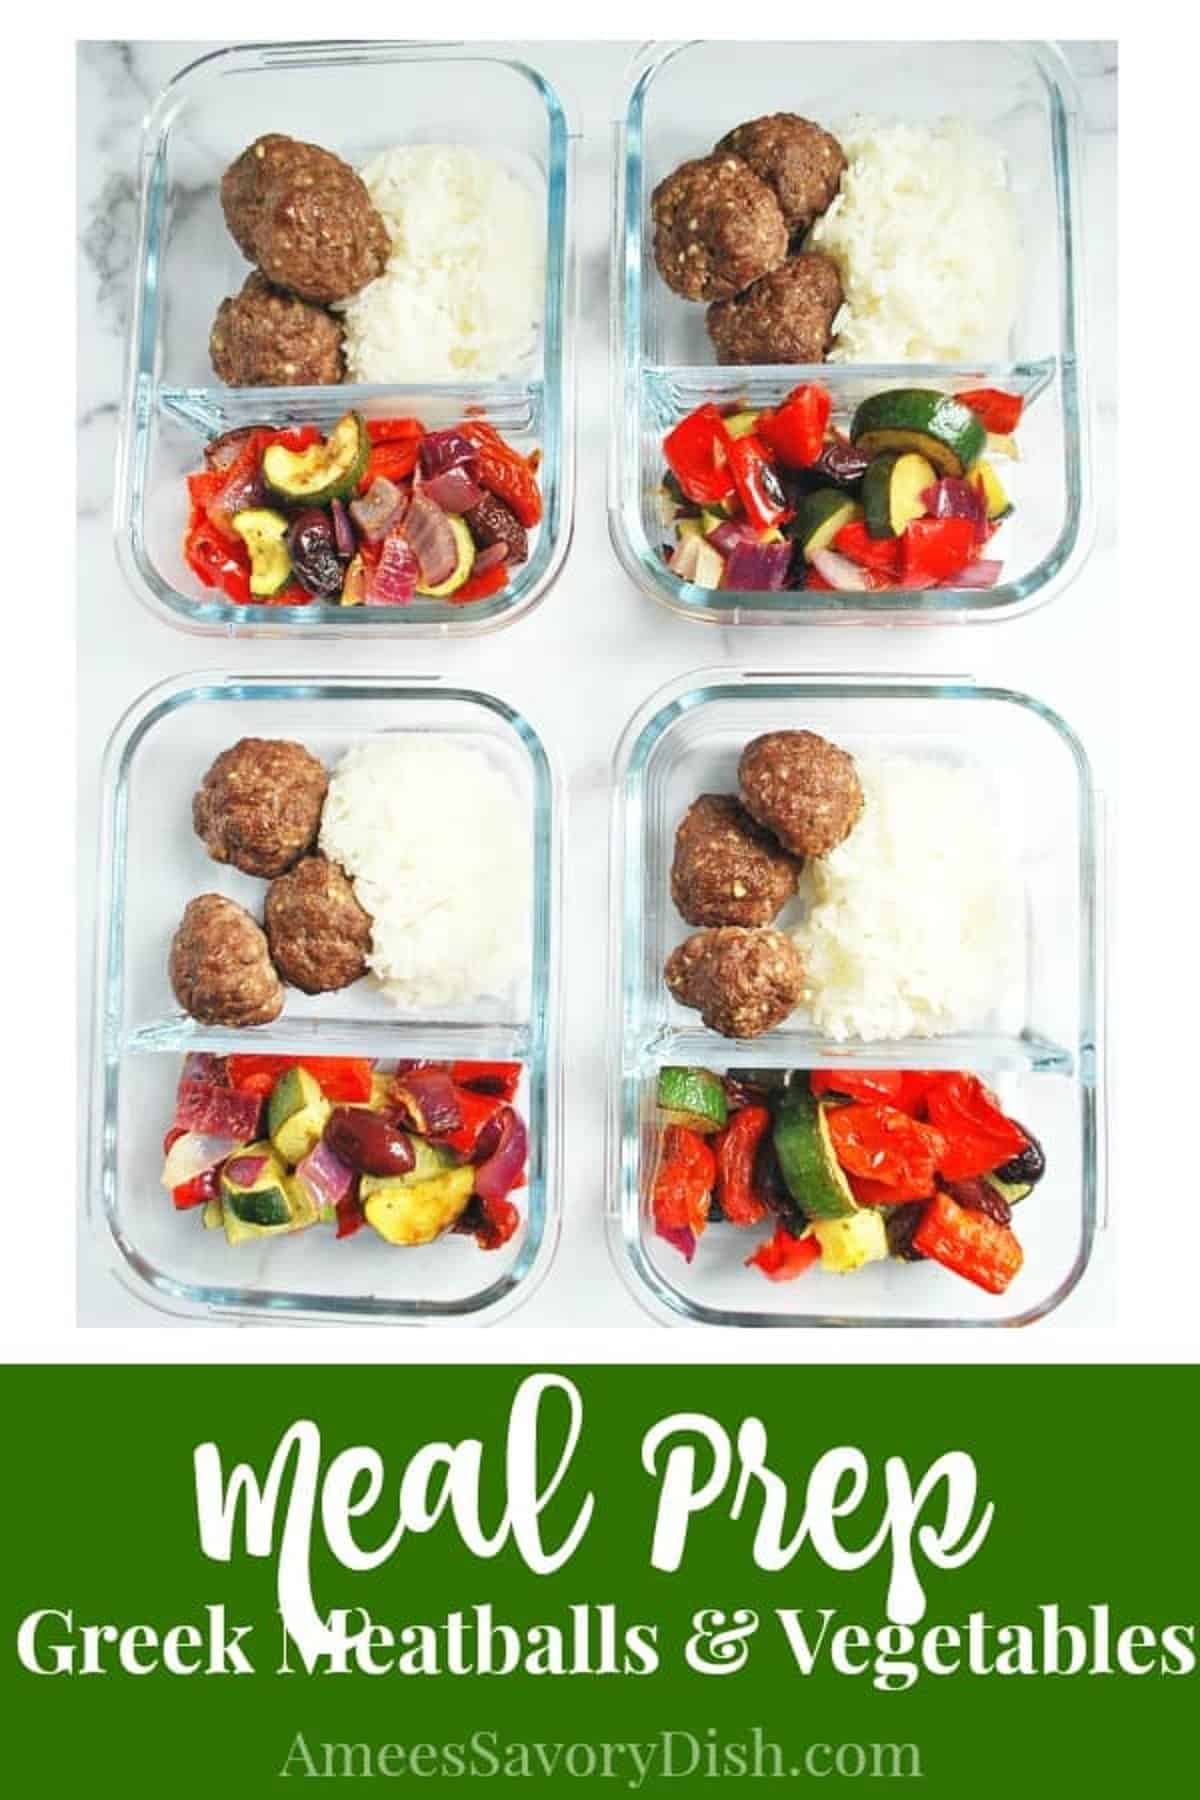 Greek meatballs, rice, and veggies, in meal prep containers. 